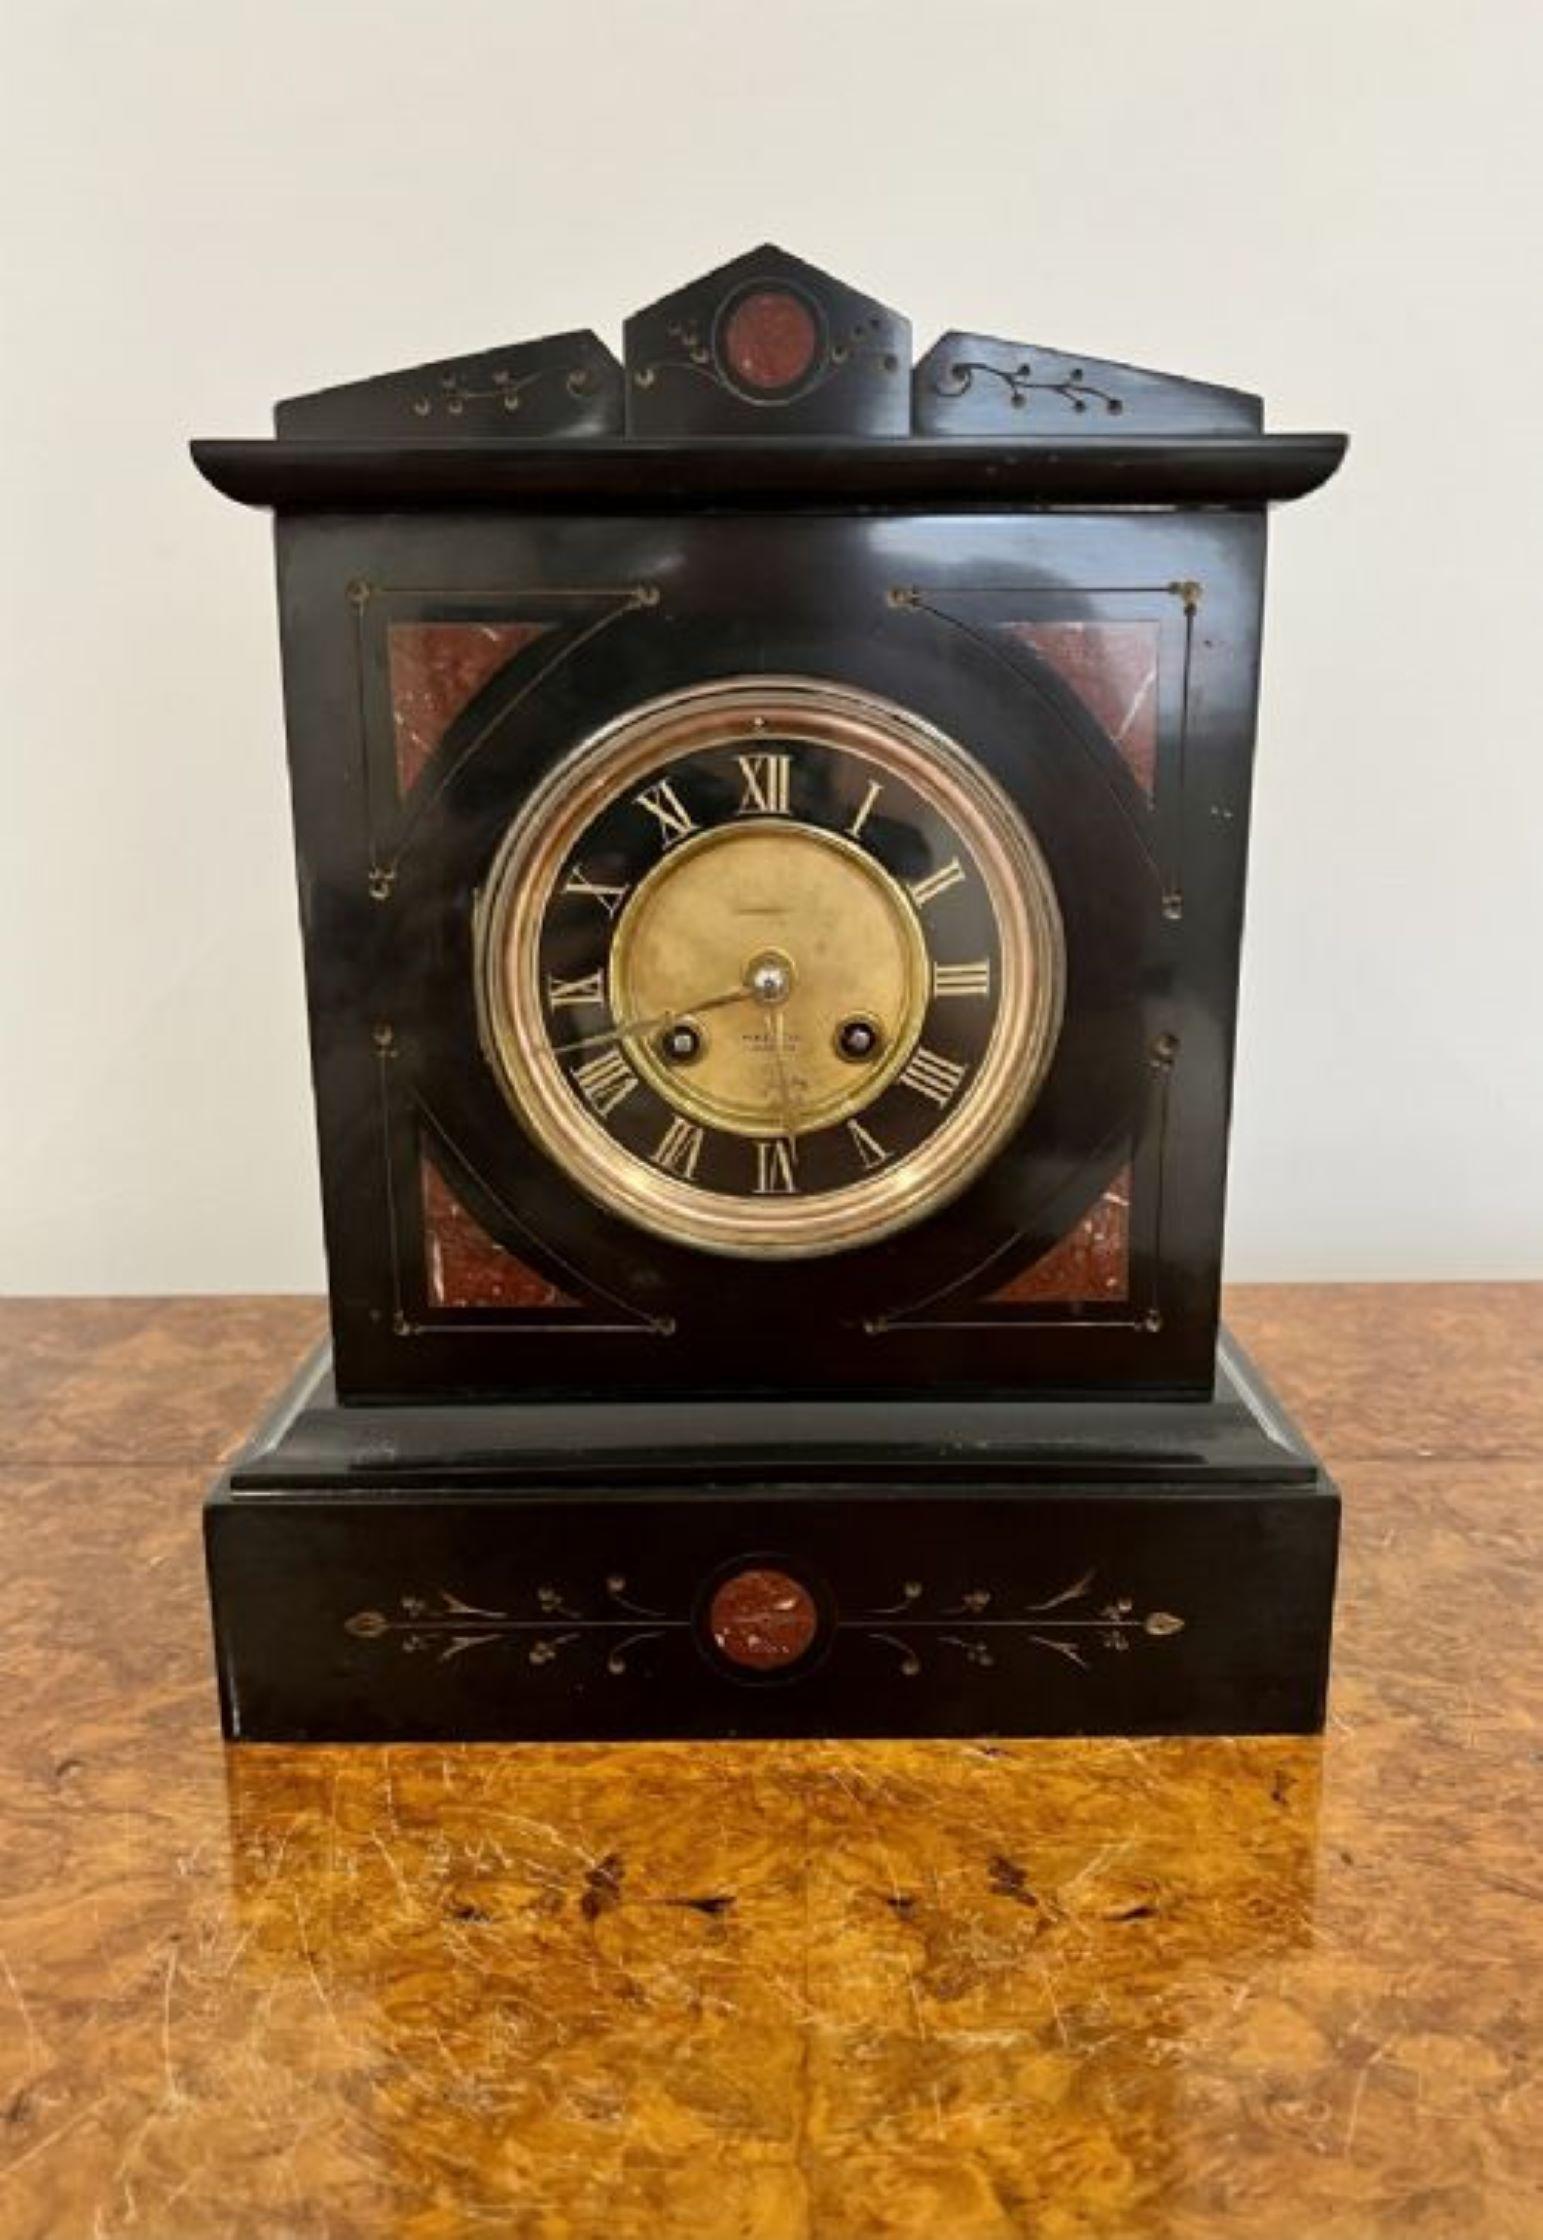 Antique Victorian quality marble clock having a quality black marble clock with a 8 day French movement striking the hour and half hour on a gong with the original key. Makers Haskwell Ipswich
Please note all of our clocks are serviced prior to